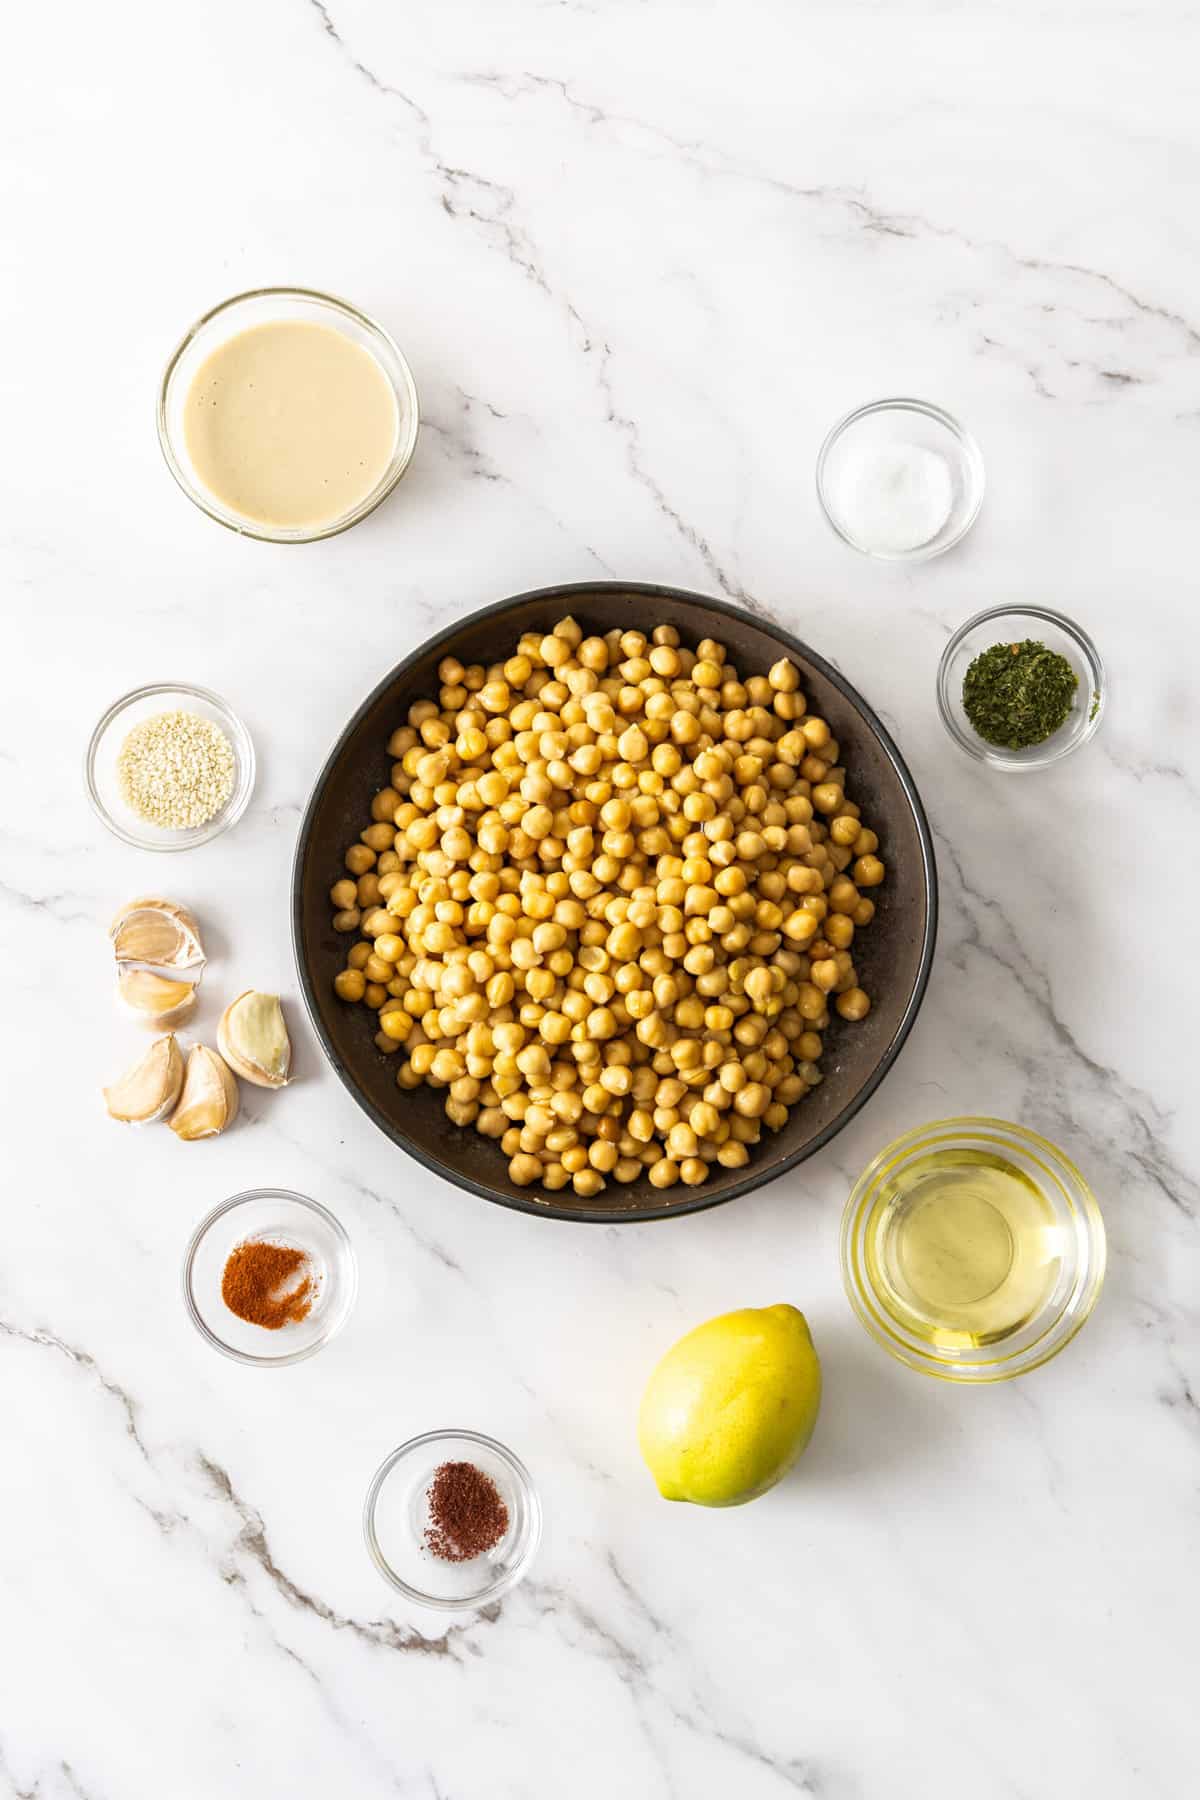 chickpeas, a lemon, garlic, and other ingredients on a marble board.